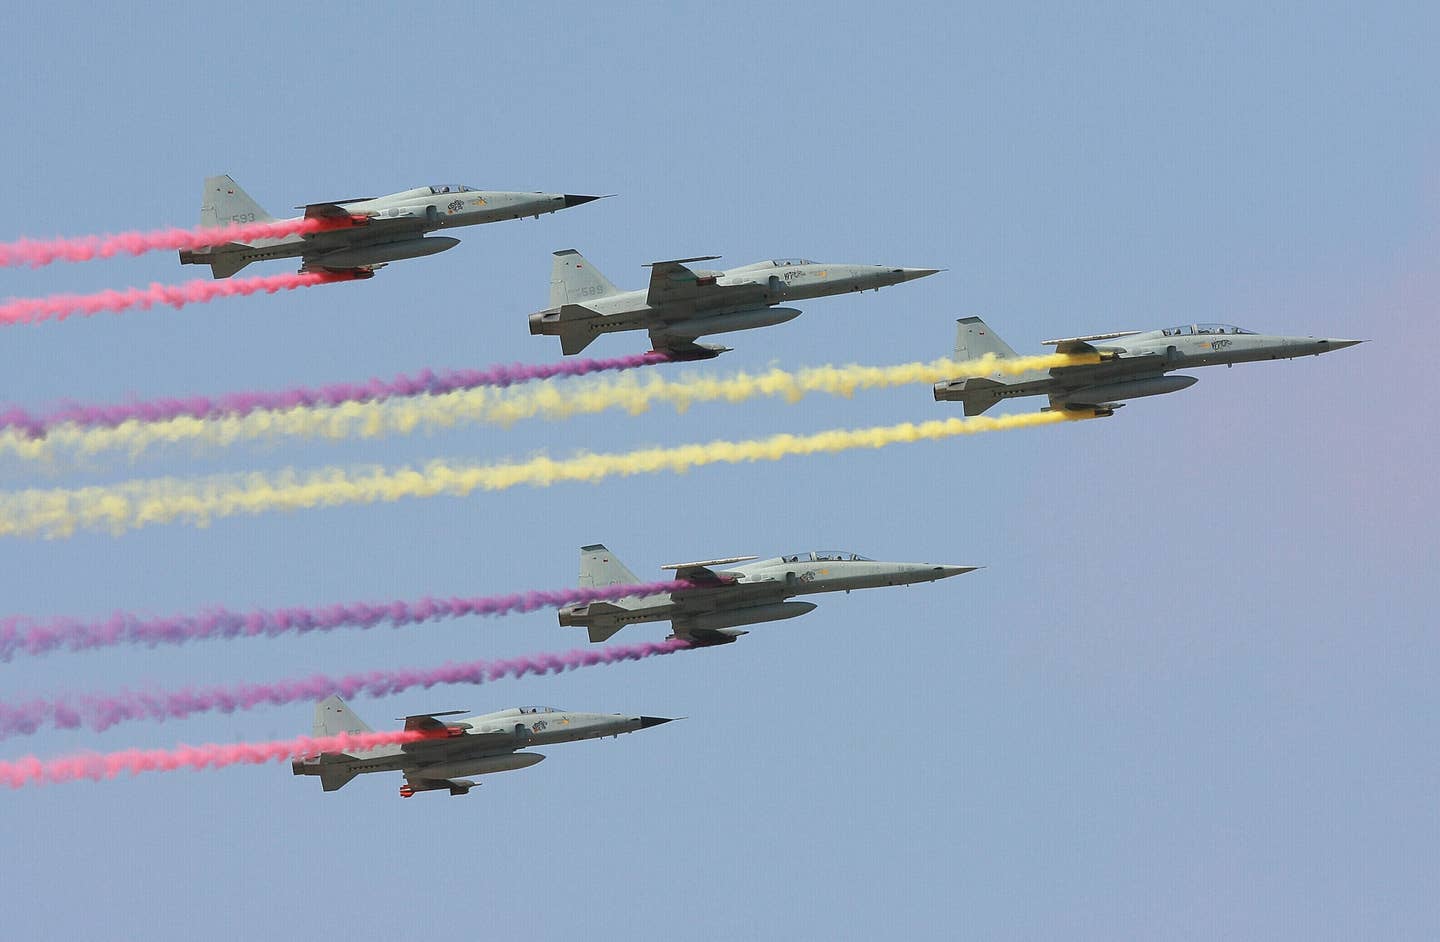 Republic of Korea Air Force F-5E/F Tiger IIs in formation over Sungnam Air Base in Seoul, South Korea. <em>Photo by Chung Sung-Jun/Getty Images</em>